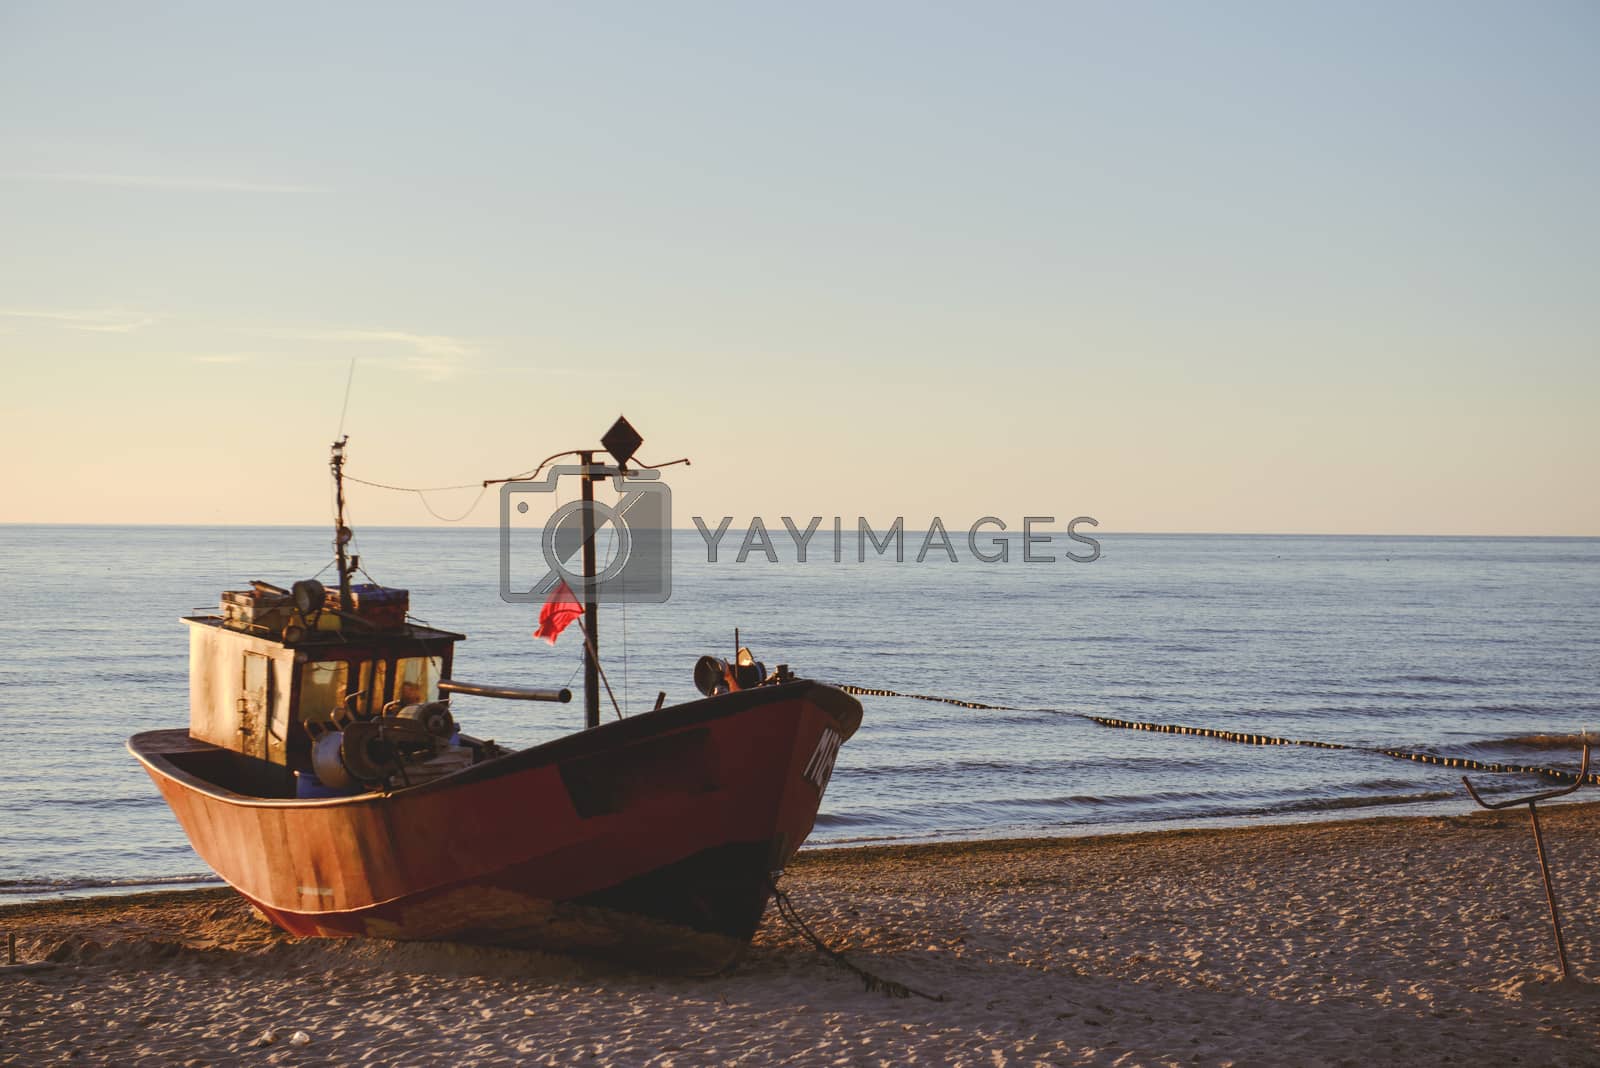 Royalty free image of fisherman boats at sunrise time on the beach by Brejeq